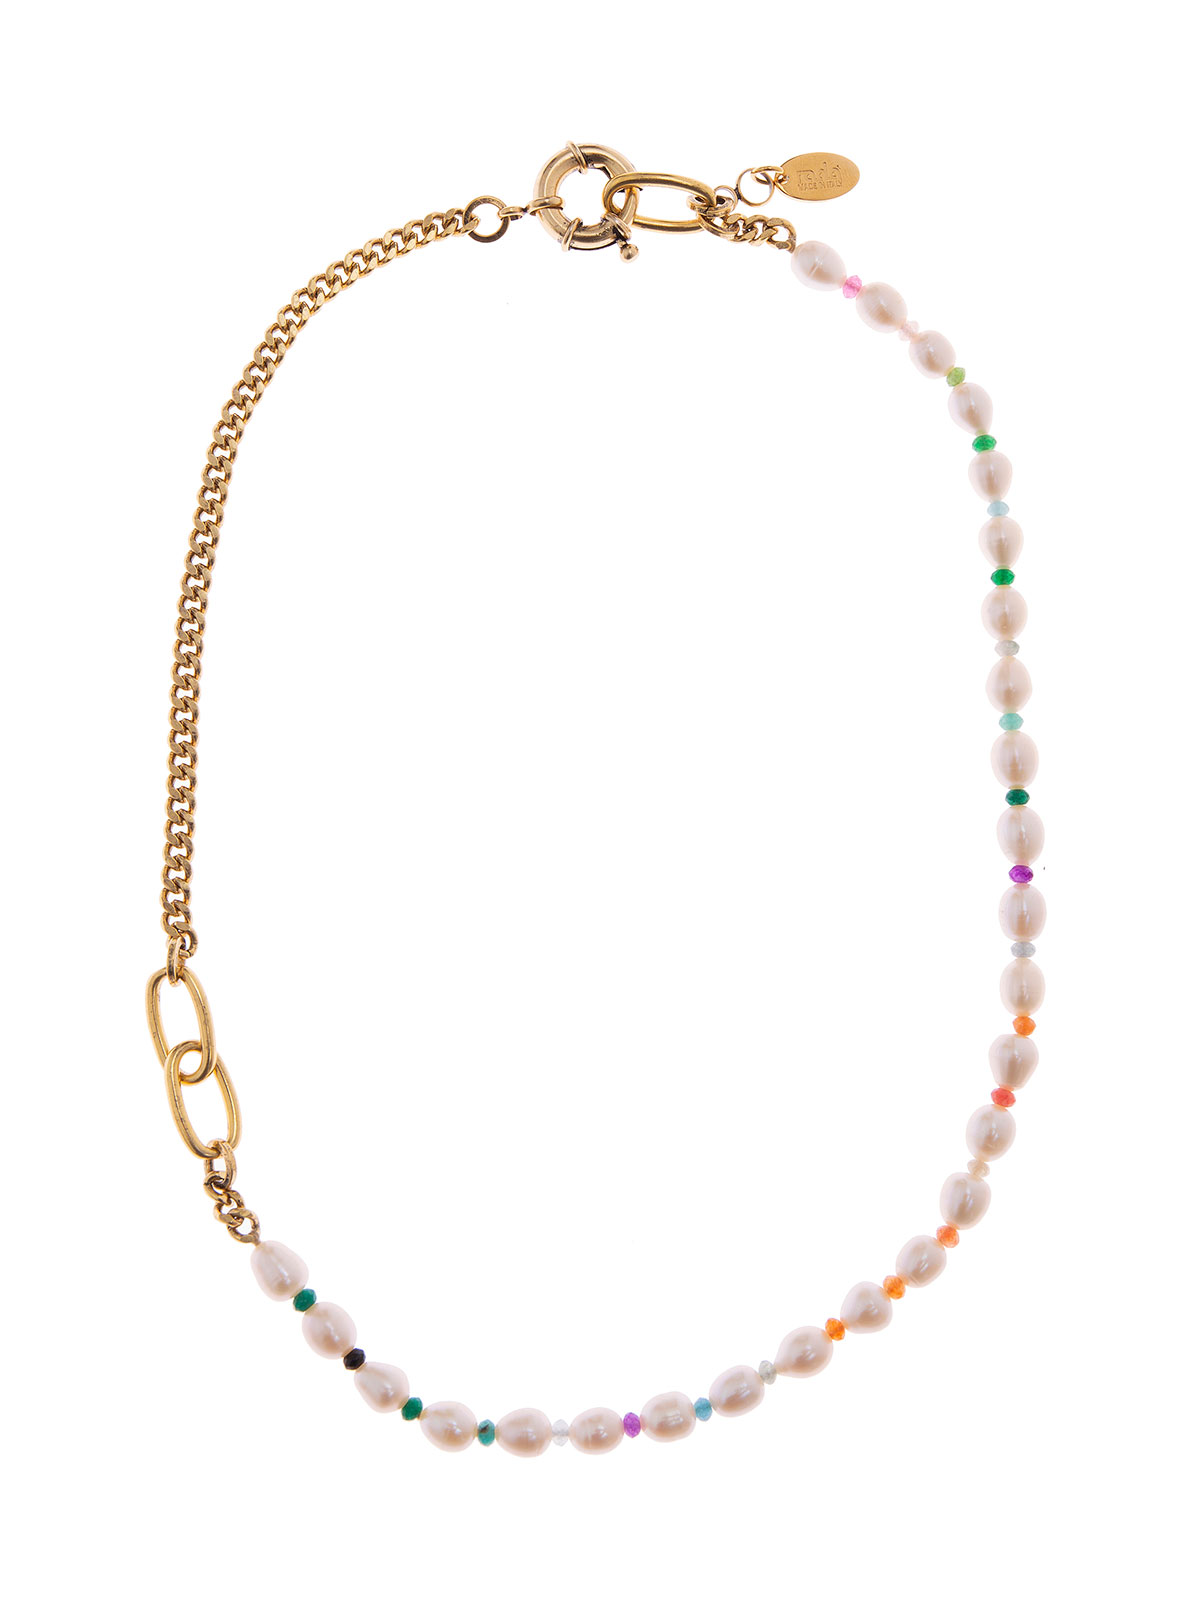 Jade and freshwater pearl necklace 